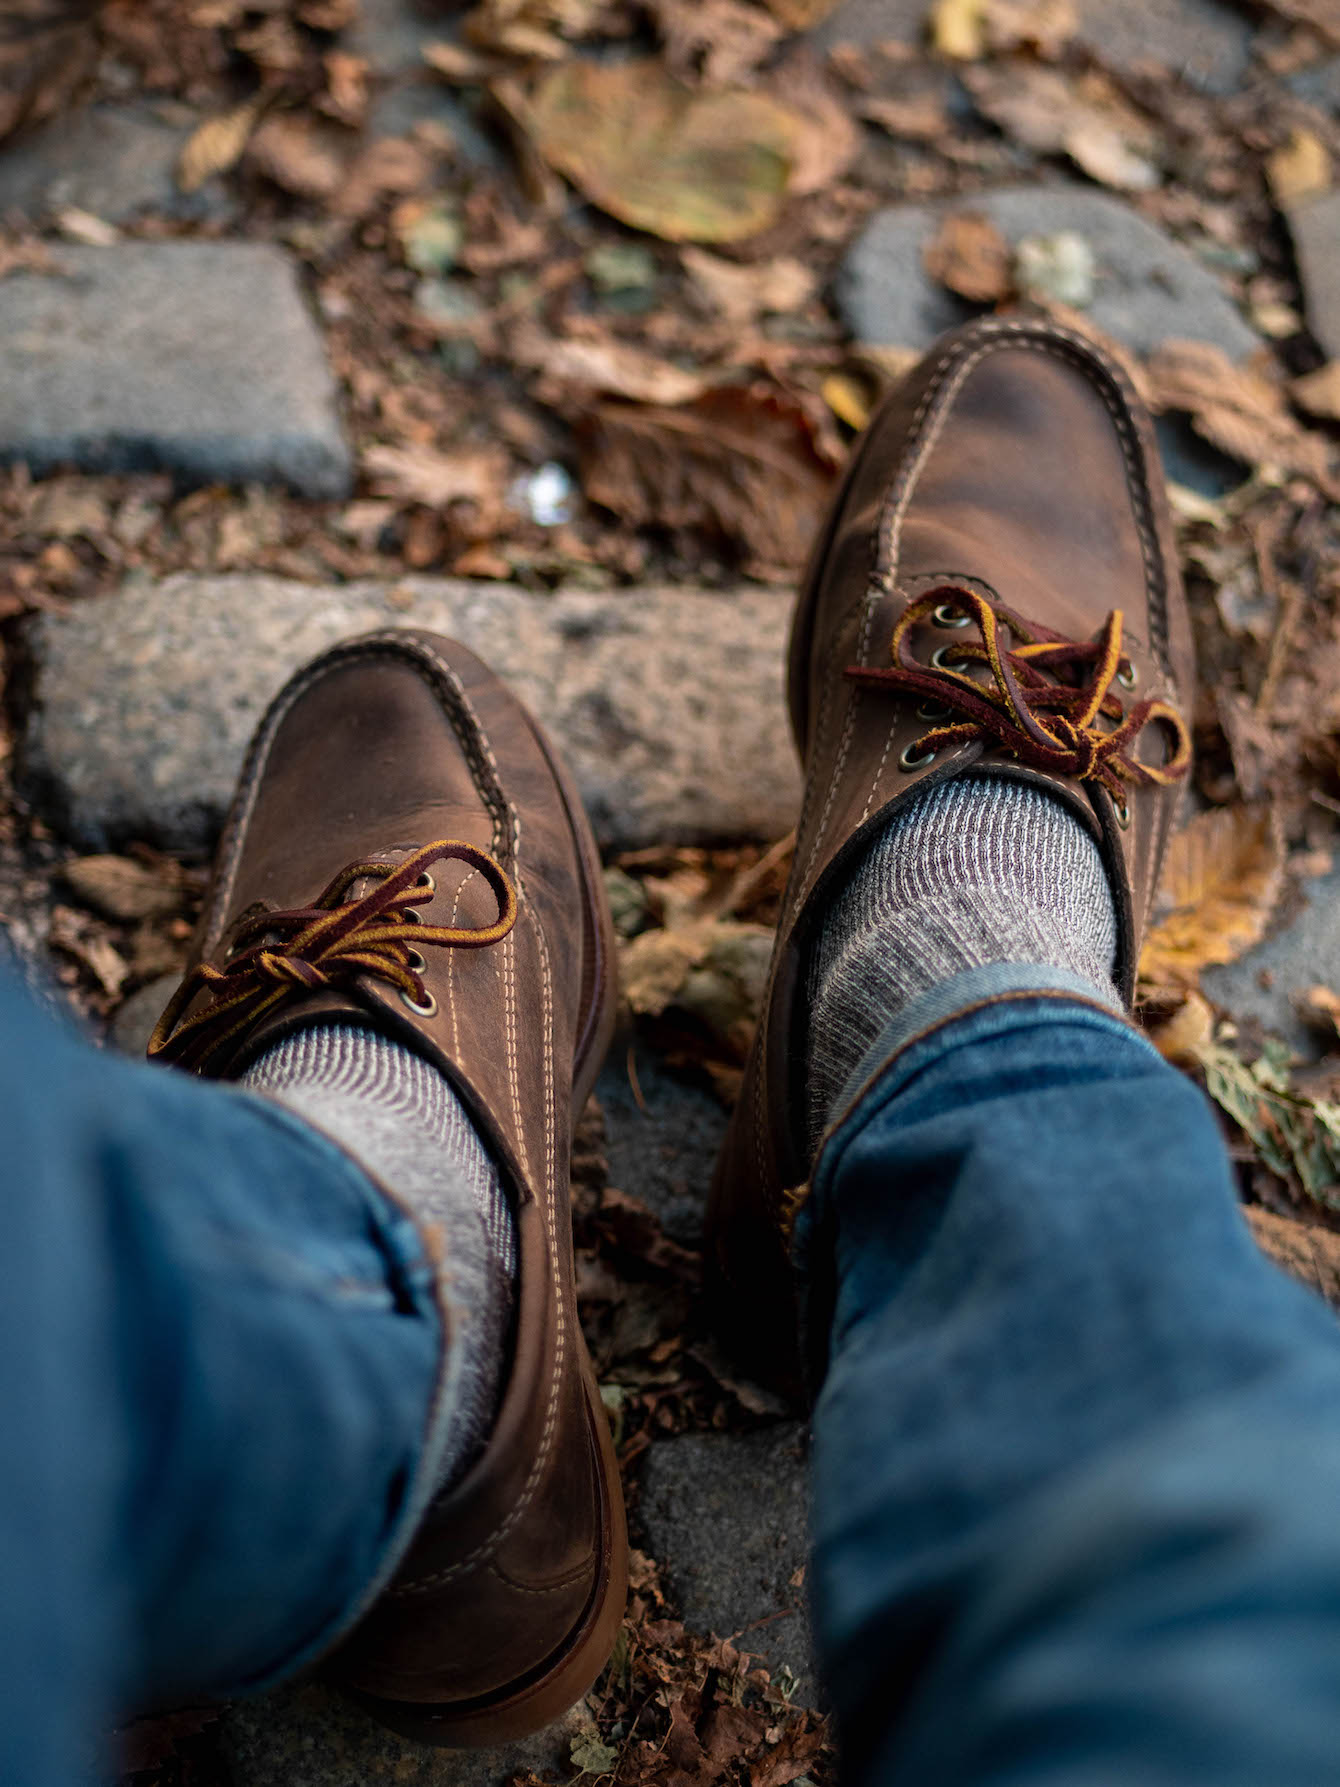 The 10 Best Fall Shoes for Men - The 